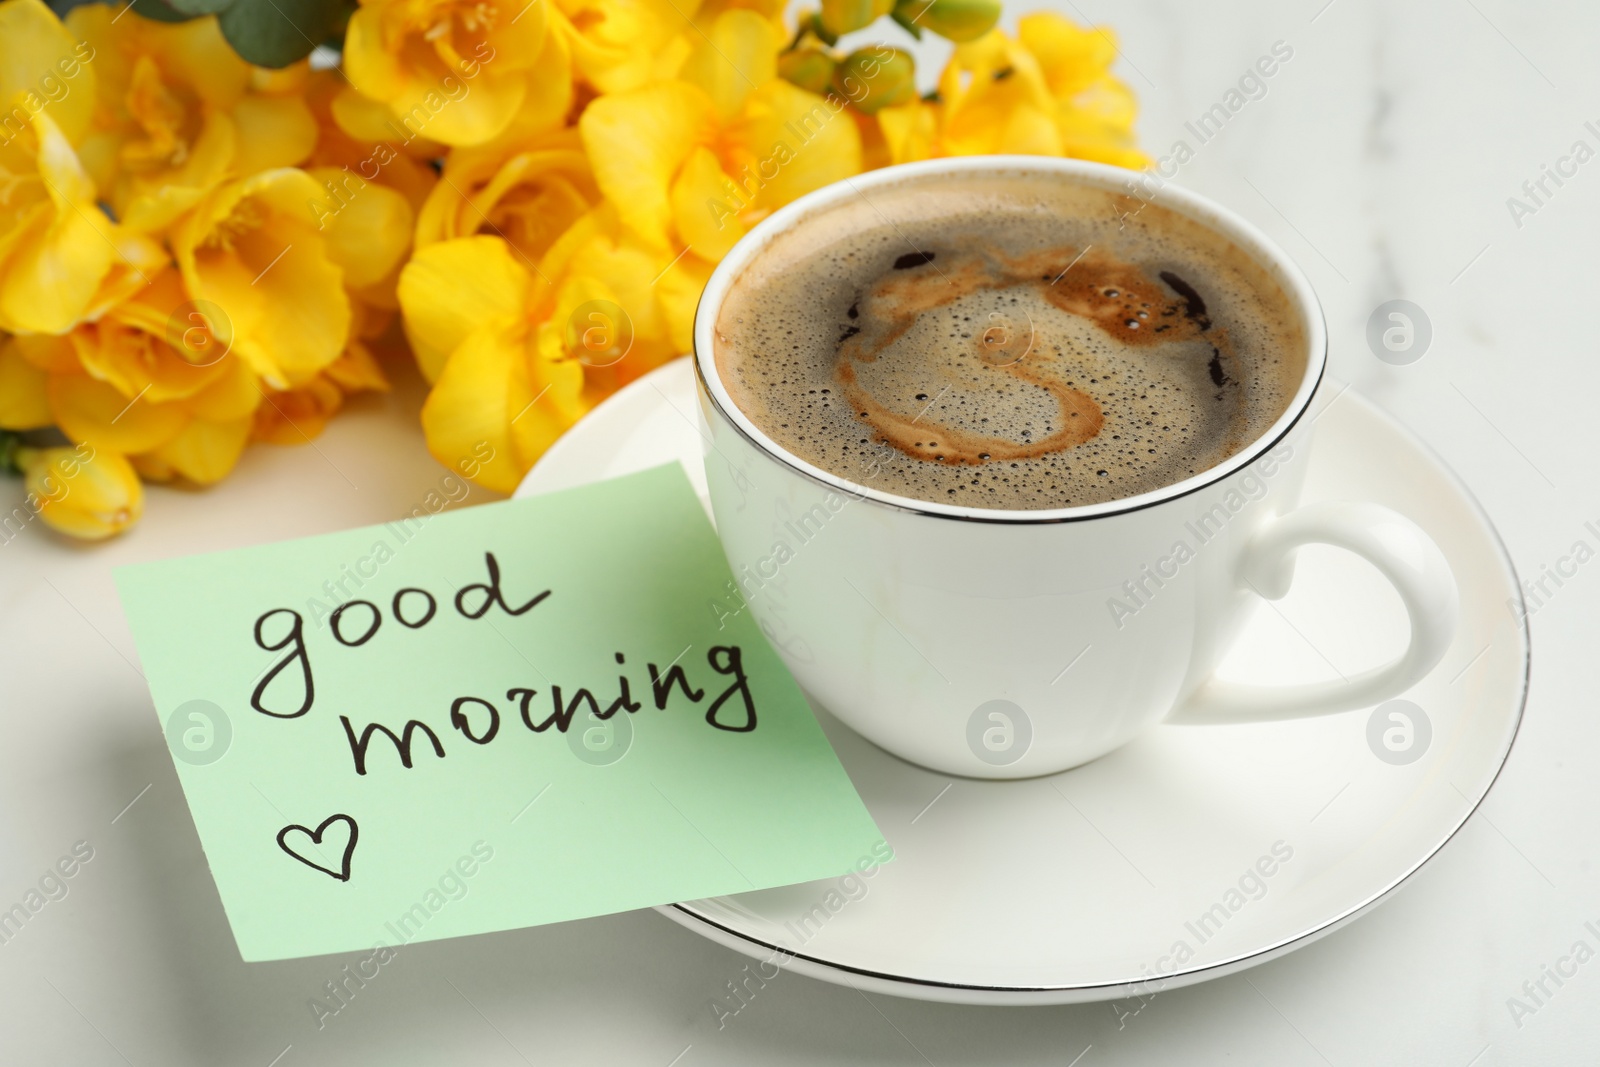 Photo of Cup of aromatic coffee, beautiful yellow freesias and Good Morning note on white marble table